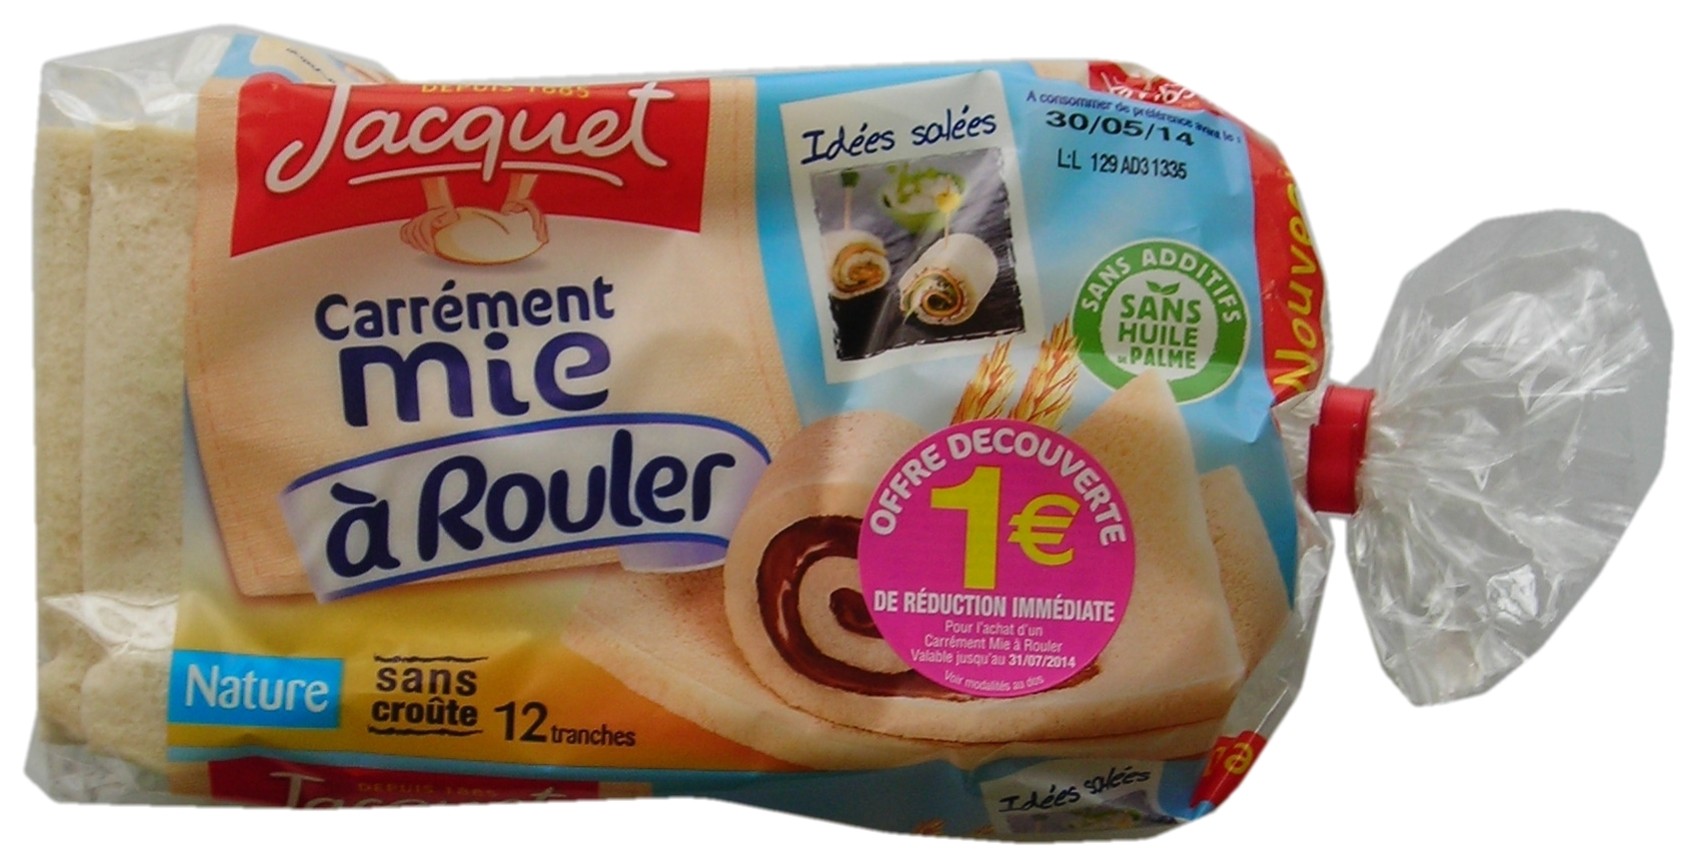 Jacquet white bread to roll